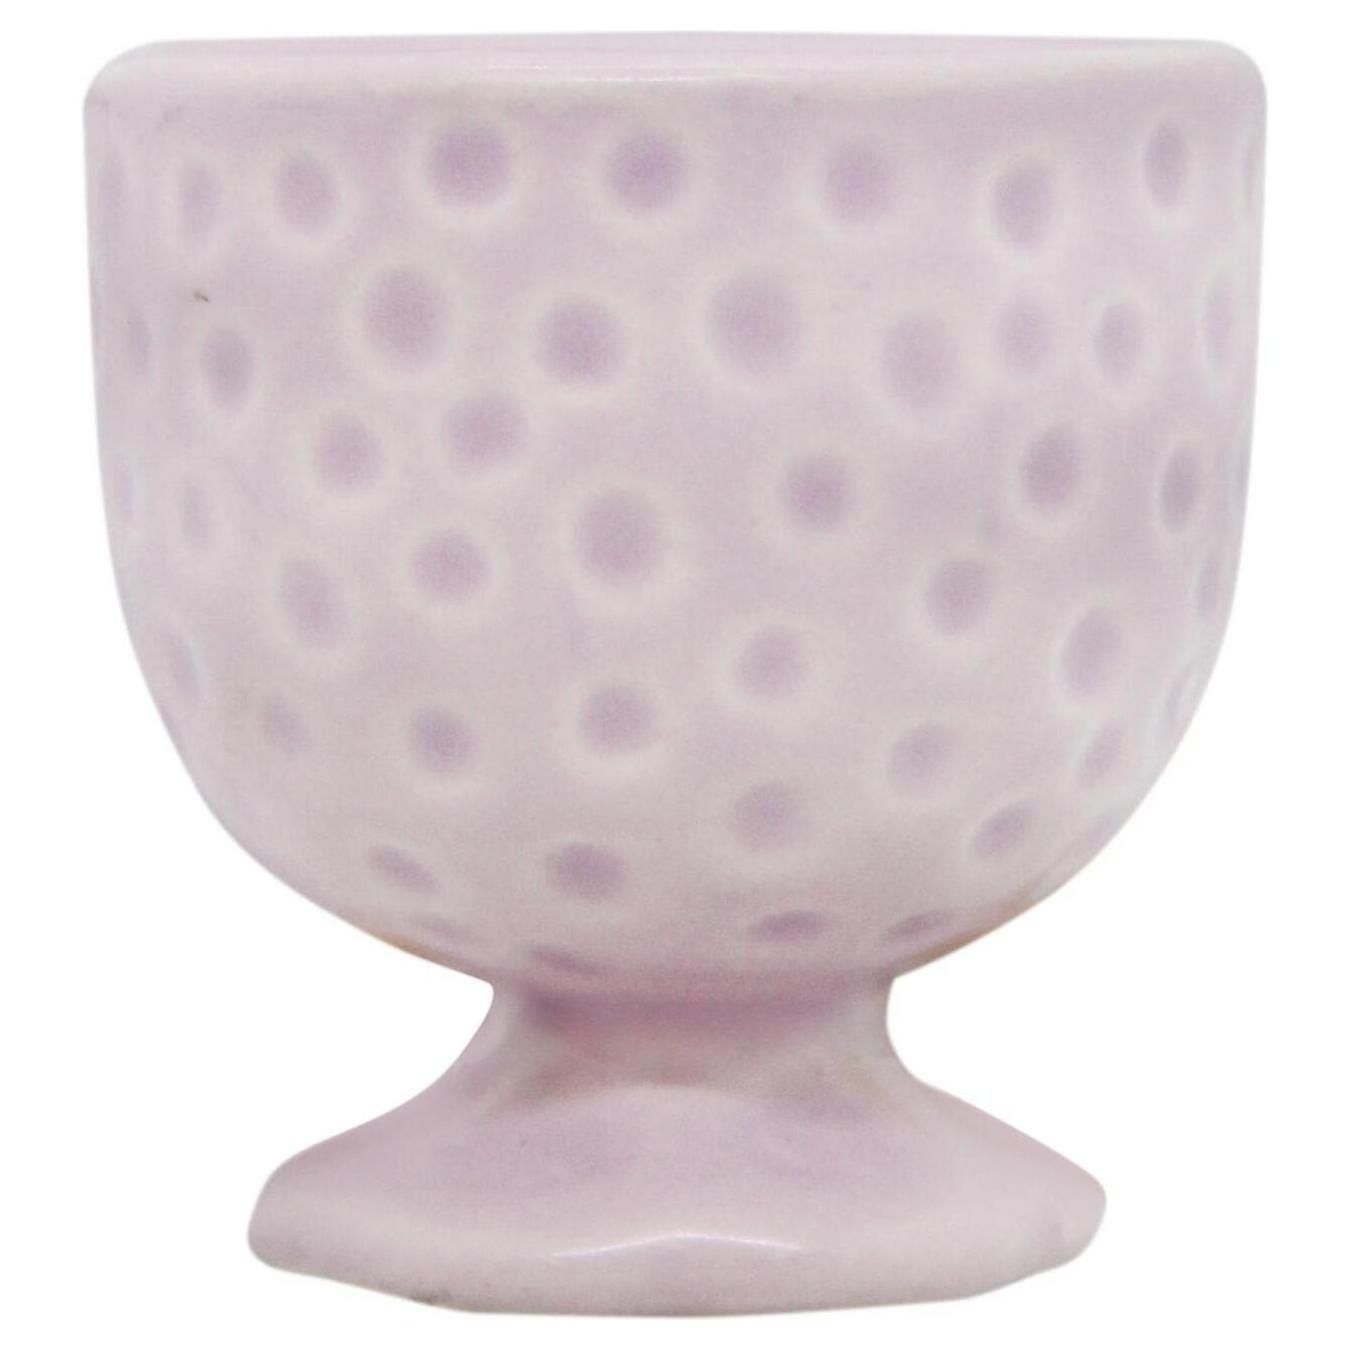 Koopman cup for eggs with dots 5.5 cm